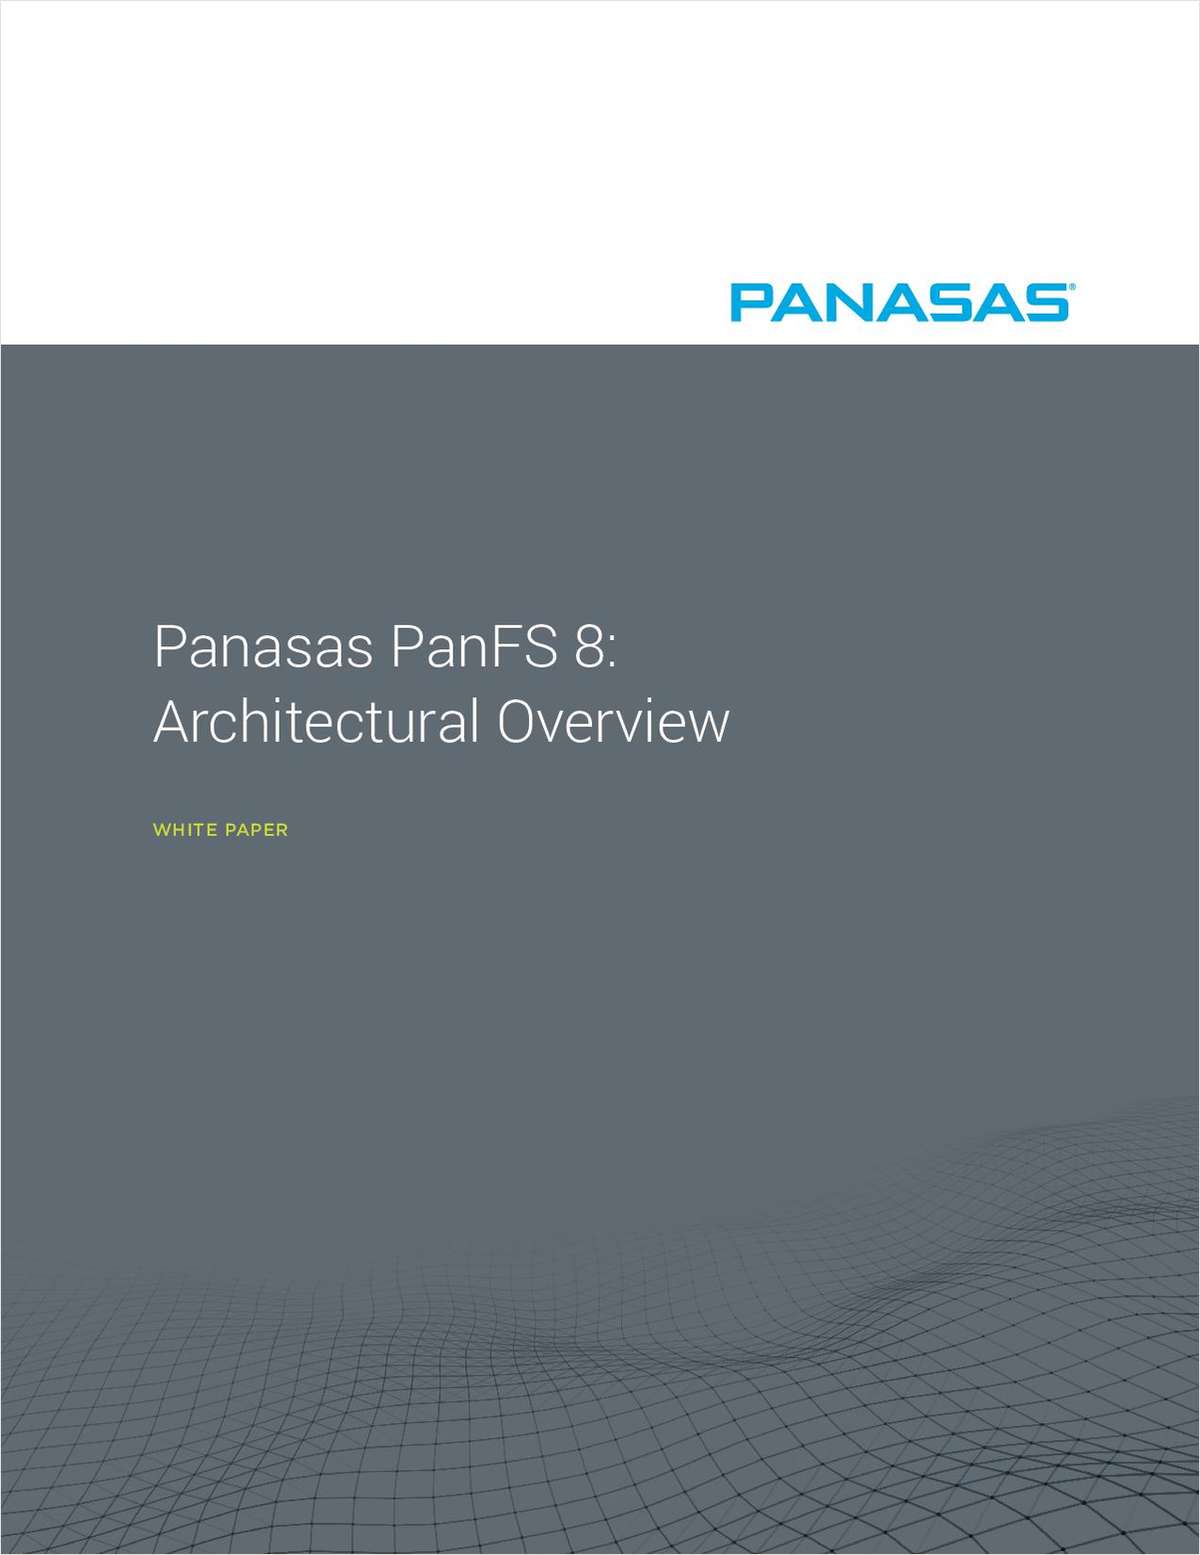 Panasas PanFS 8: Architectural Overview